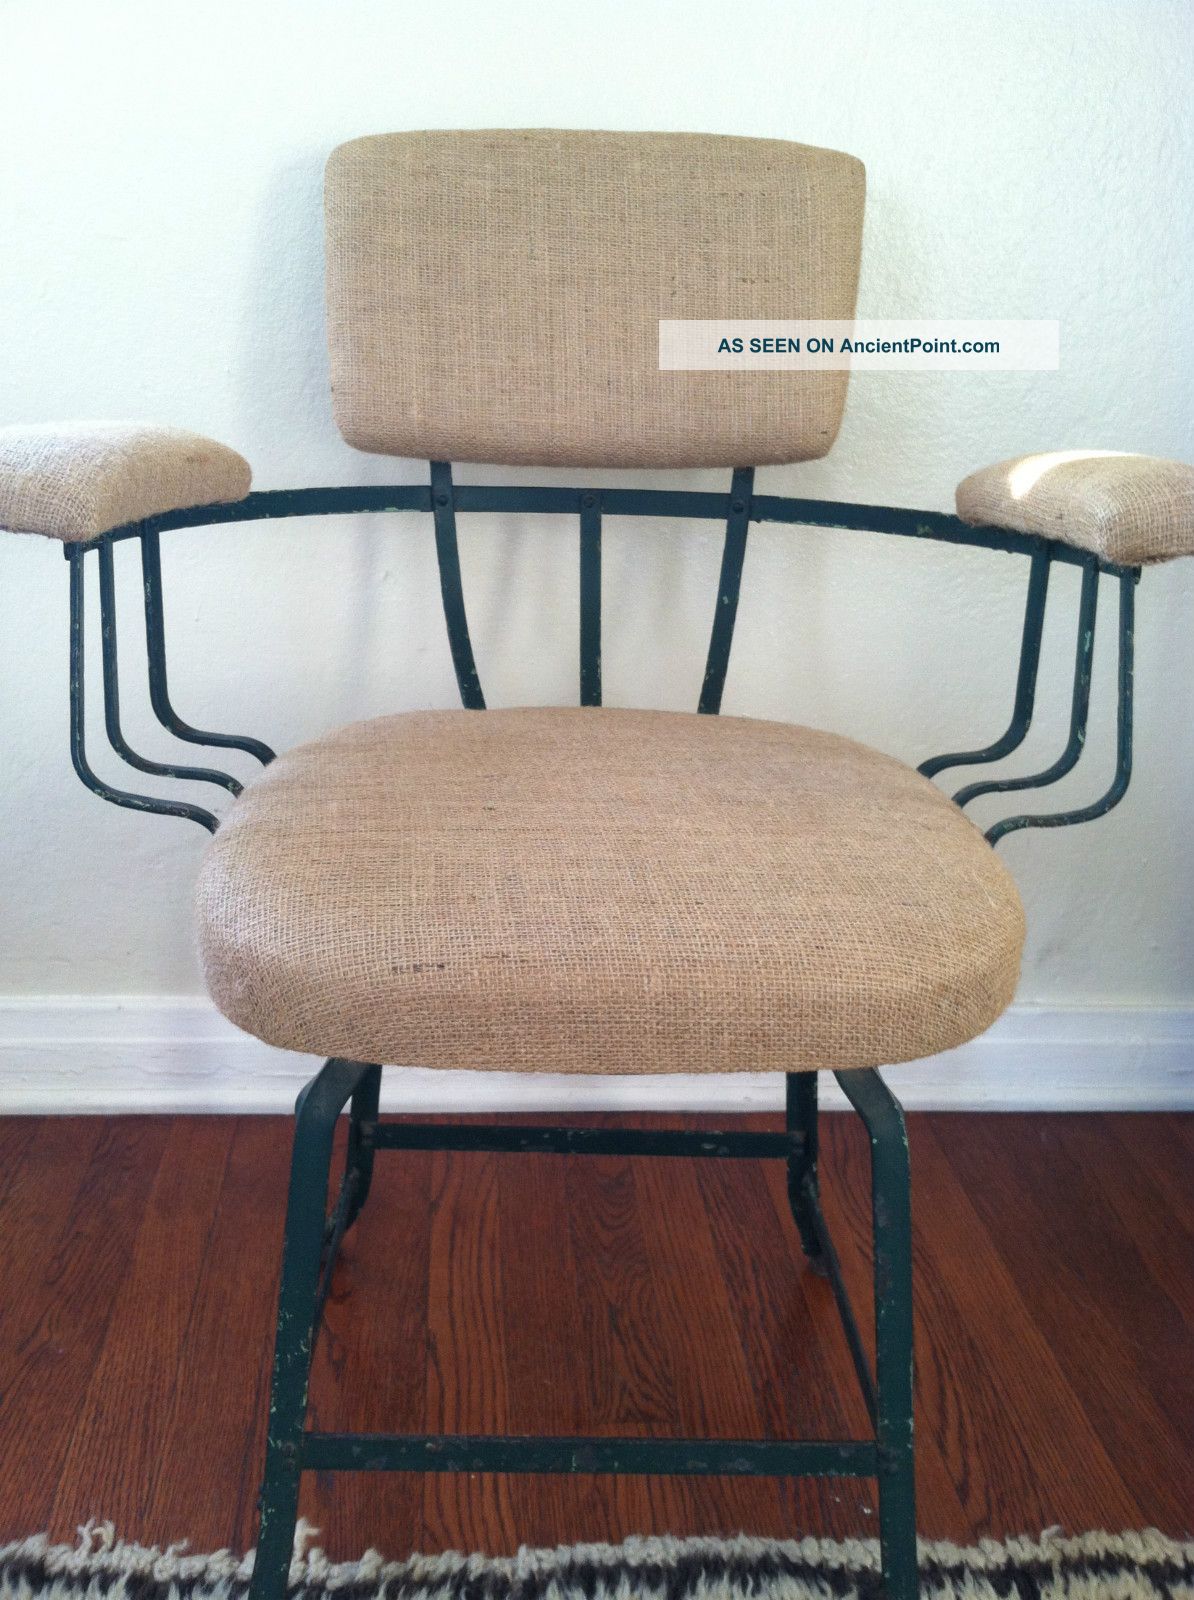 Vintage Early 1900s Industrial Iron Chair Burlap Upholstery Kitchen/garden Uk Fr 1900-1950 photo